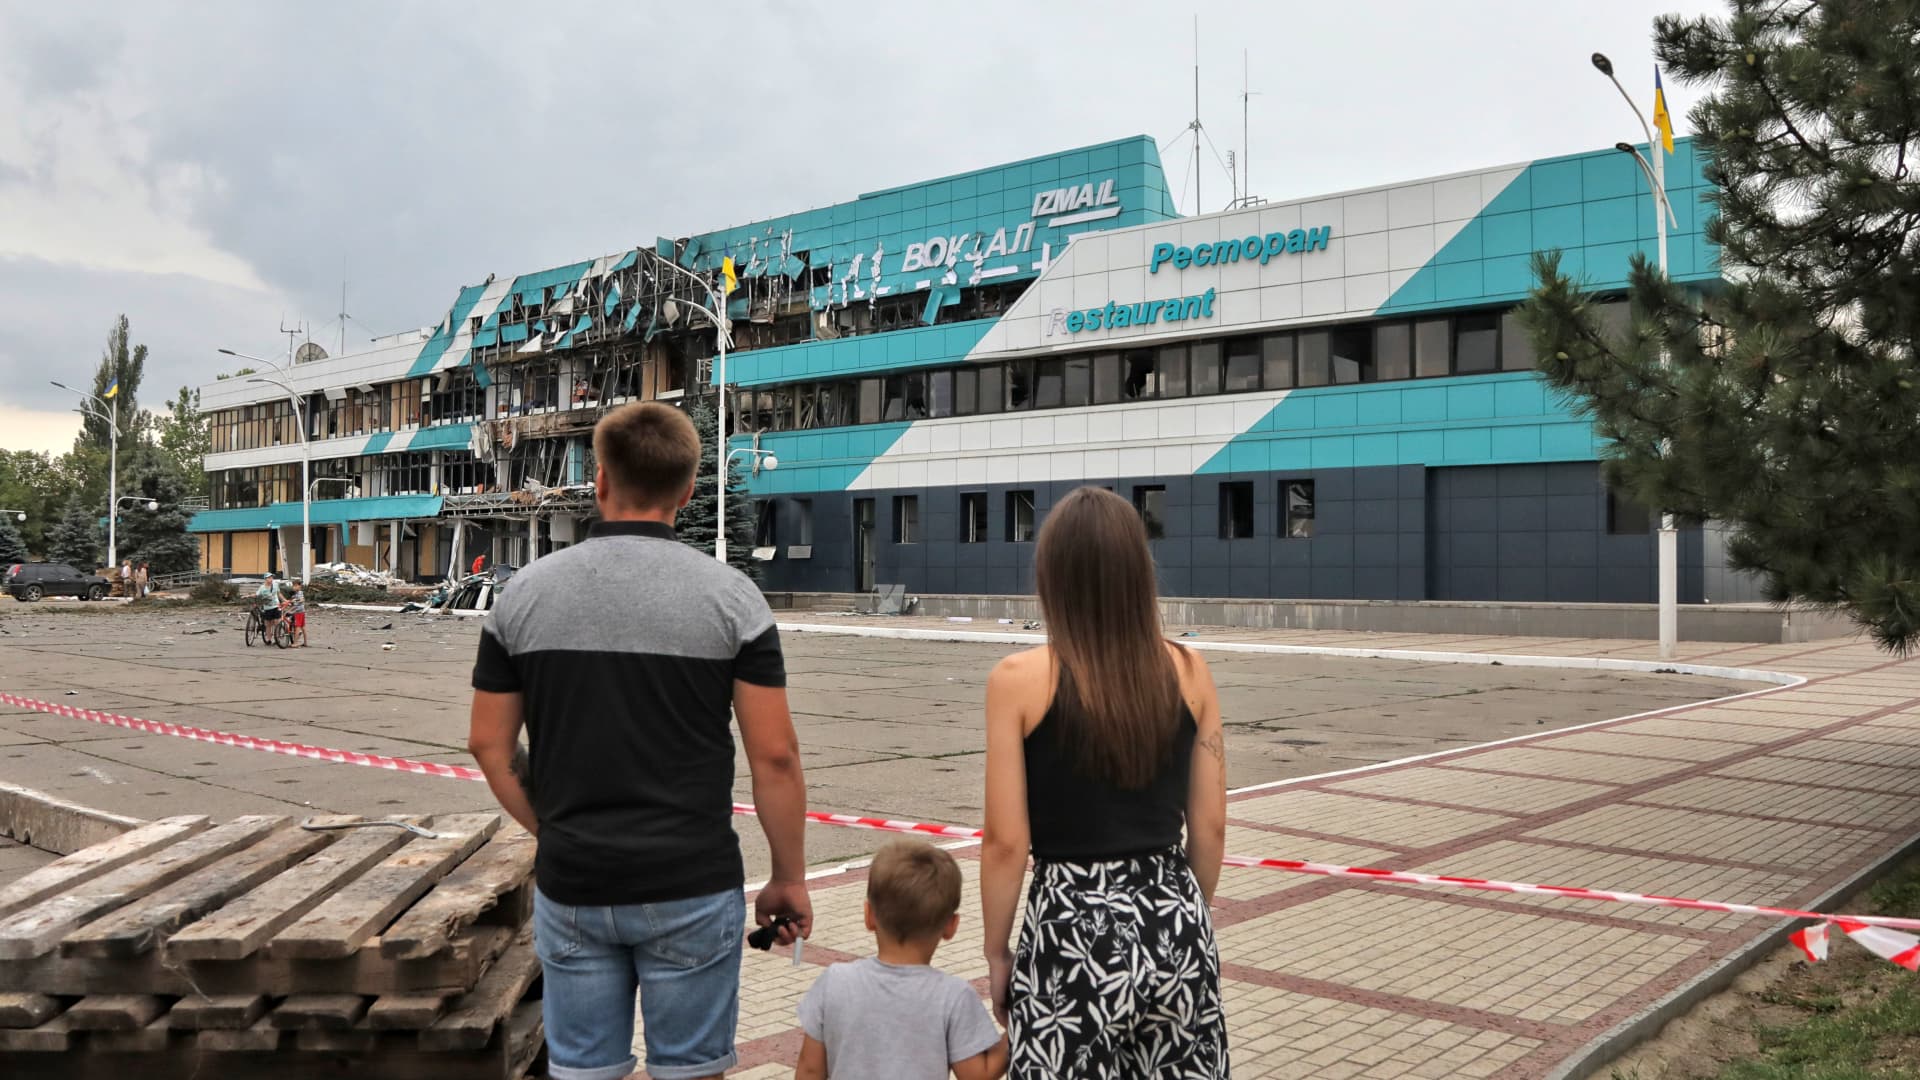 Members of the public look at the Marine Terminal building damaged in the Russian drone attack on the port infrastructure of Izmail situated on the Danube River Wednesday night, August 2, Izmail, Odesa Region, southern Ukraine. (Photo credit should read Nina Liashonok / Ukrinform/Future Publishing via Getty Images)